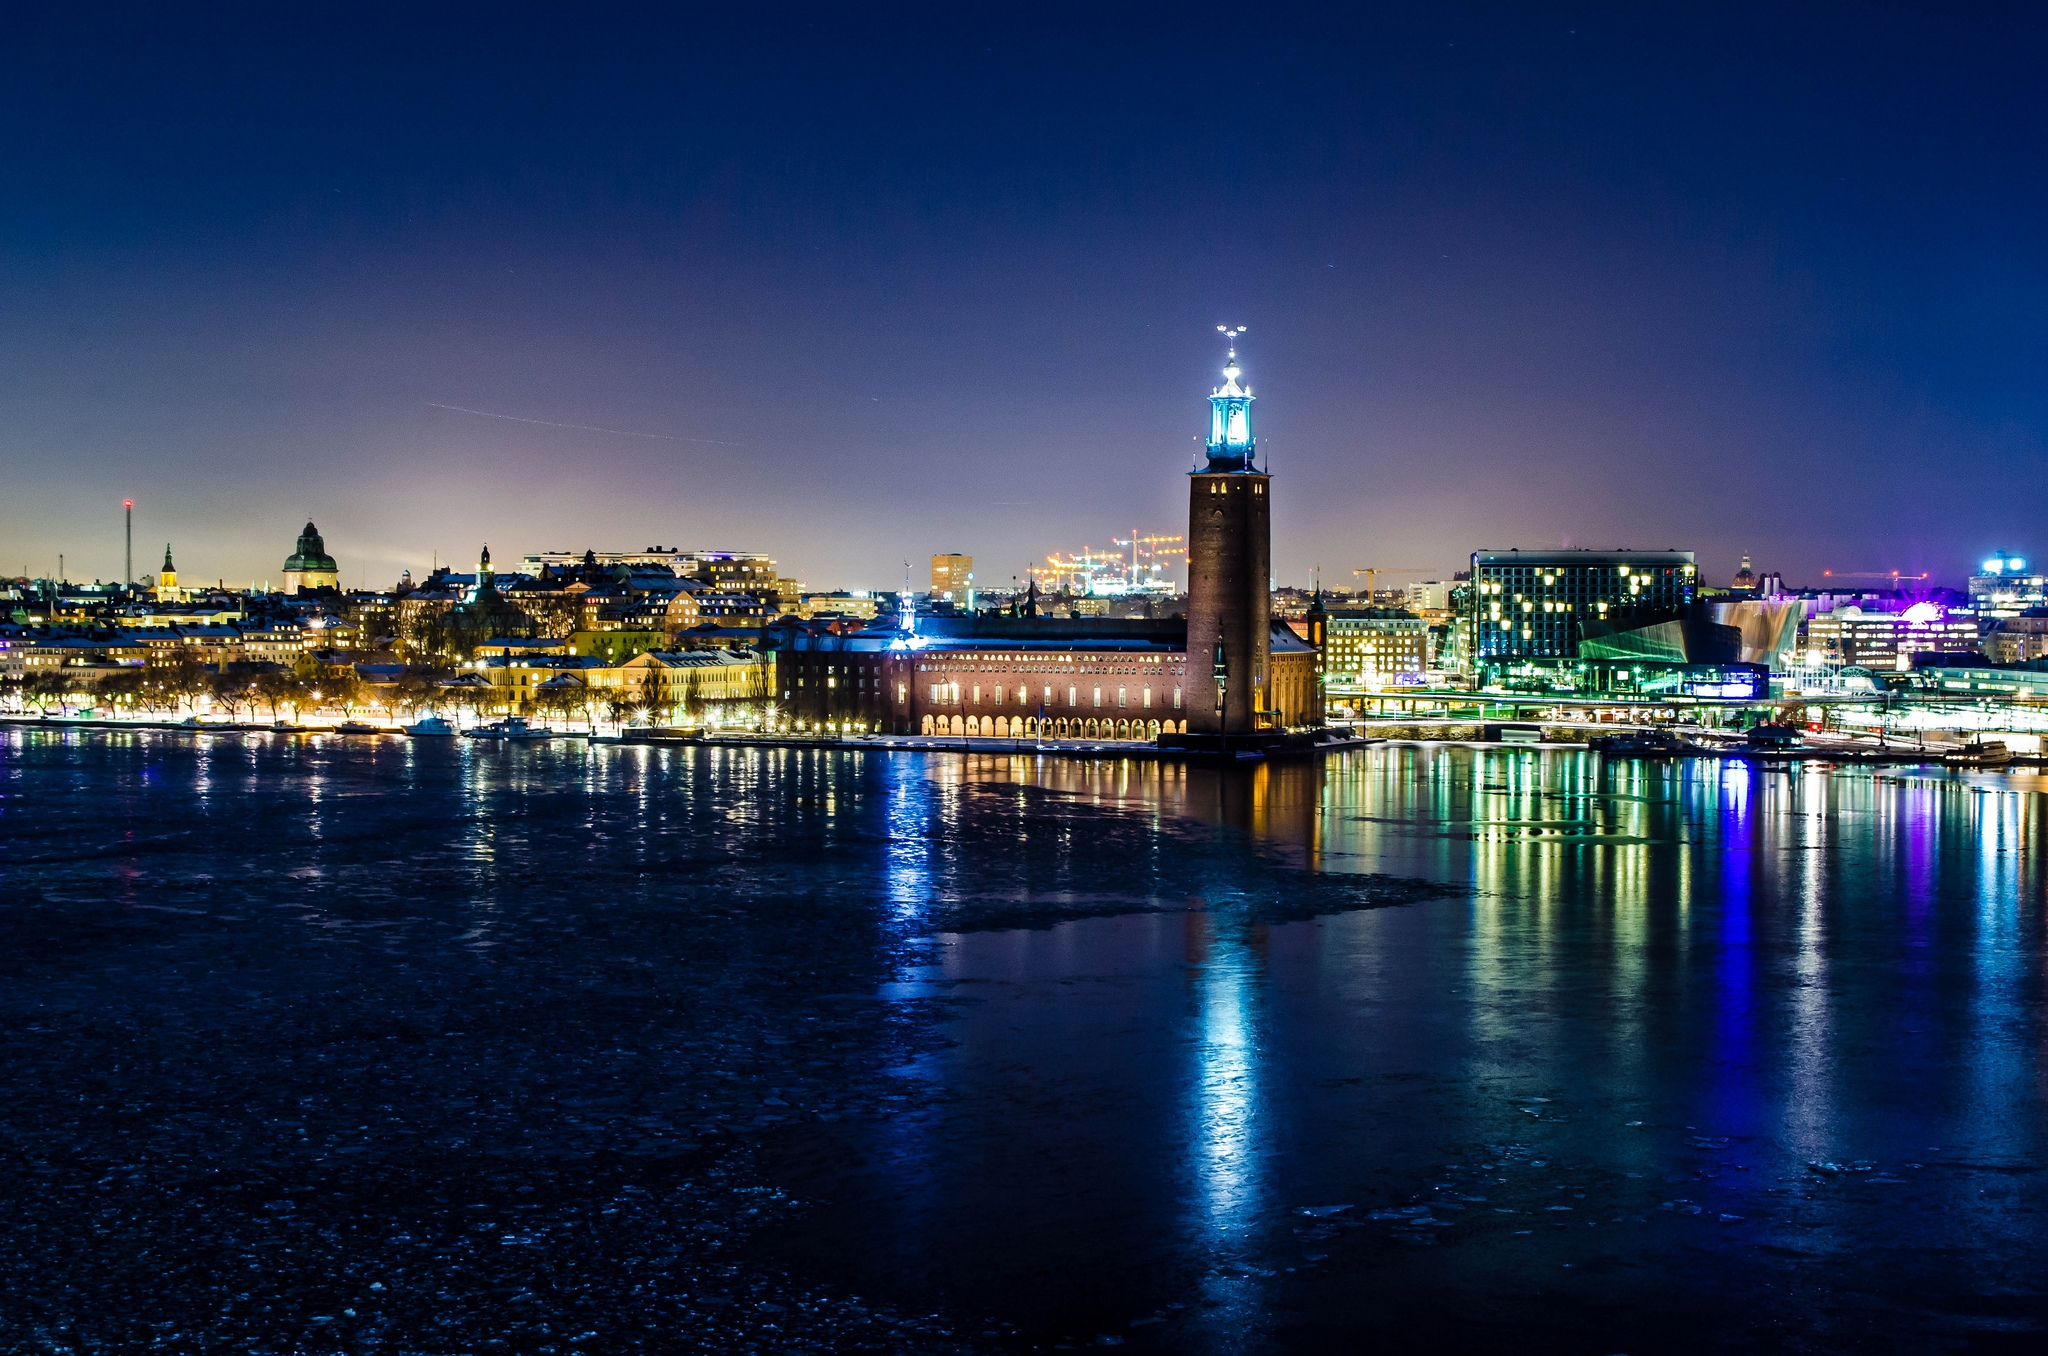 sweden, cities, winter, night, lights, reflection, stockholm, town hall